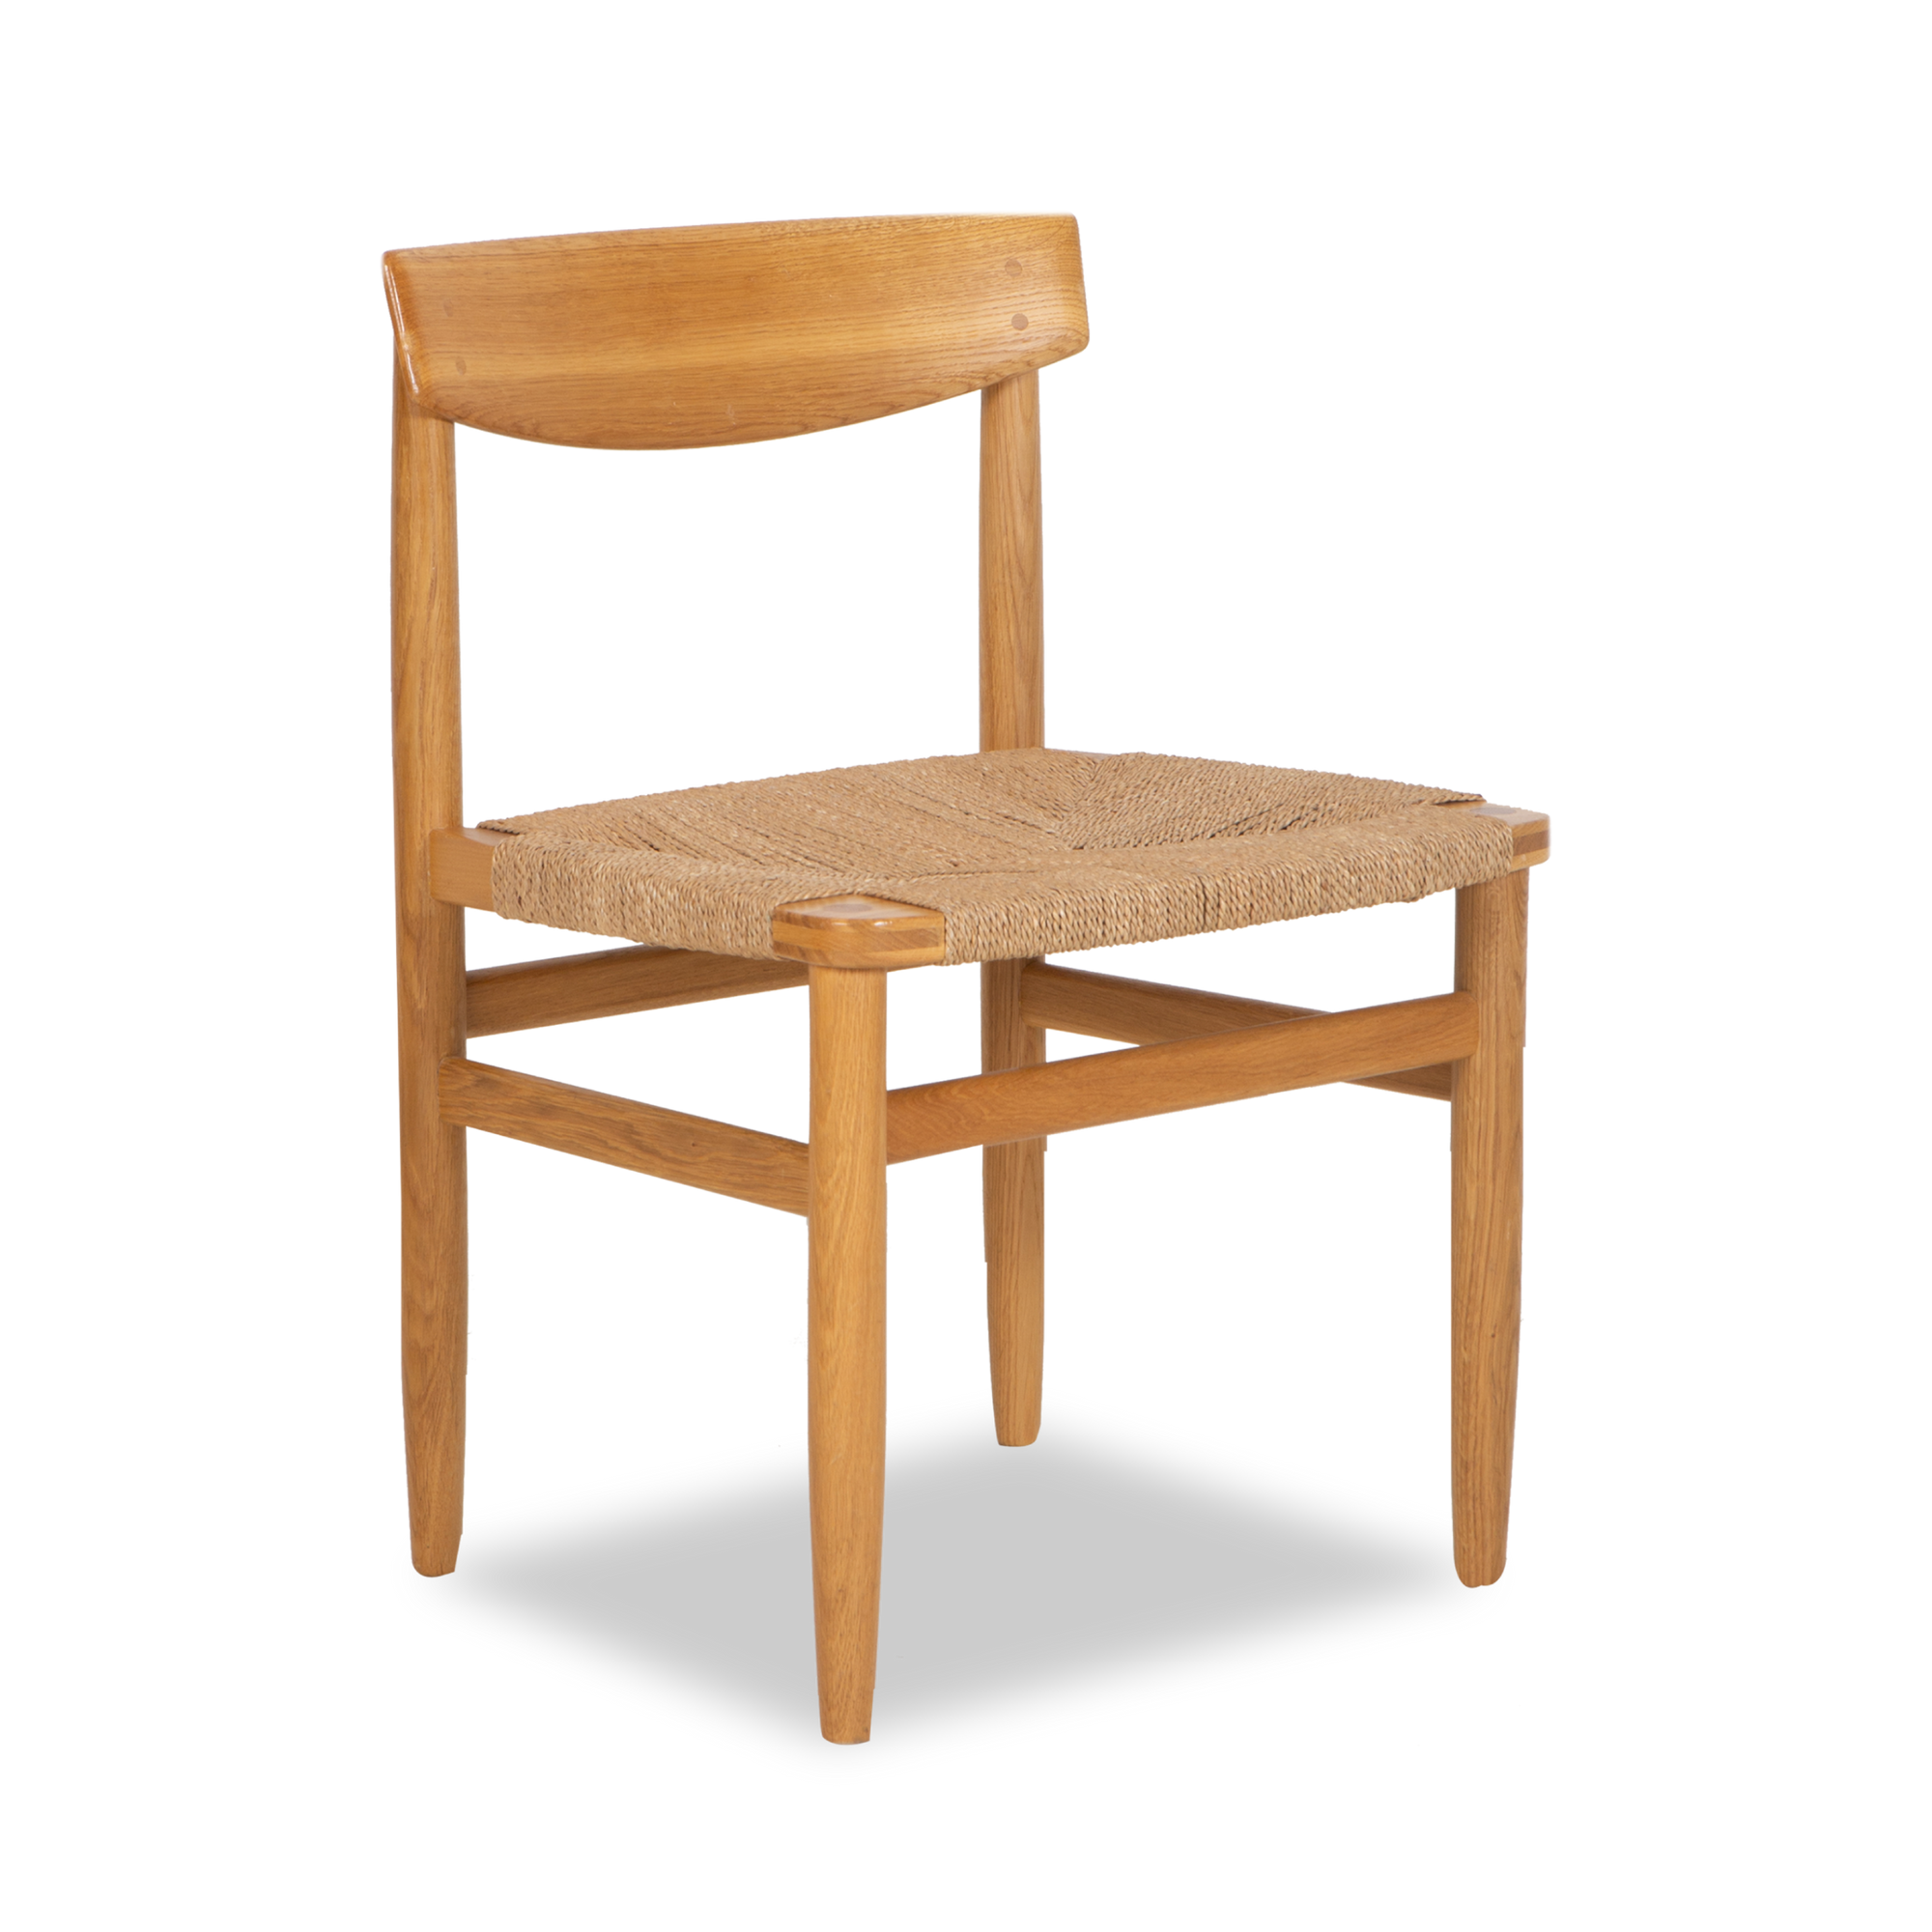 A display of fine craftsmanship, this vintage Model 537 'Oresund' Chair was designed by Børge Mogensen and manufactured by Karl Andersson & Söner, circa 1960s.